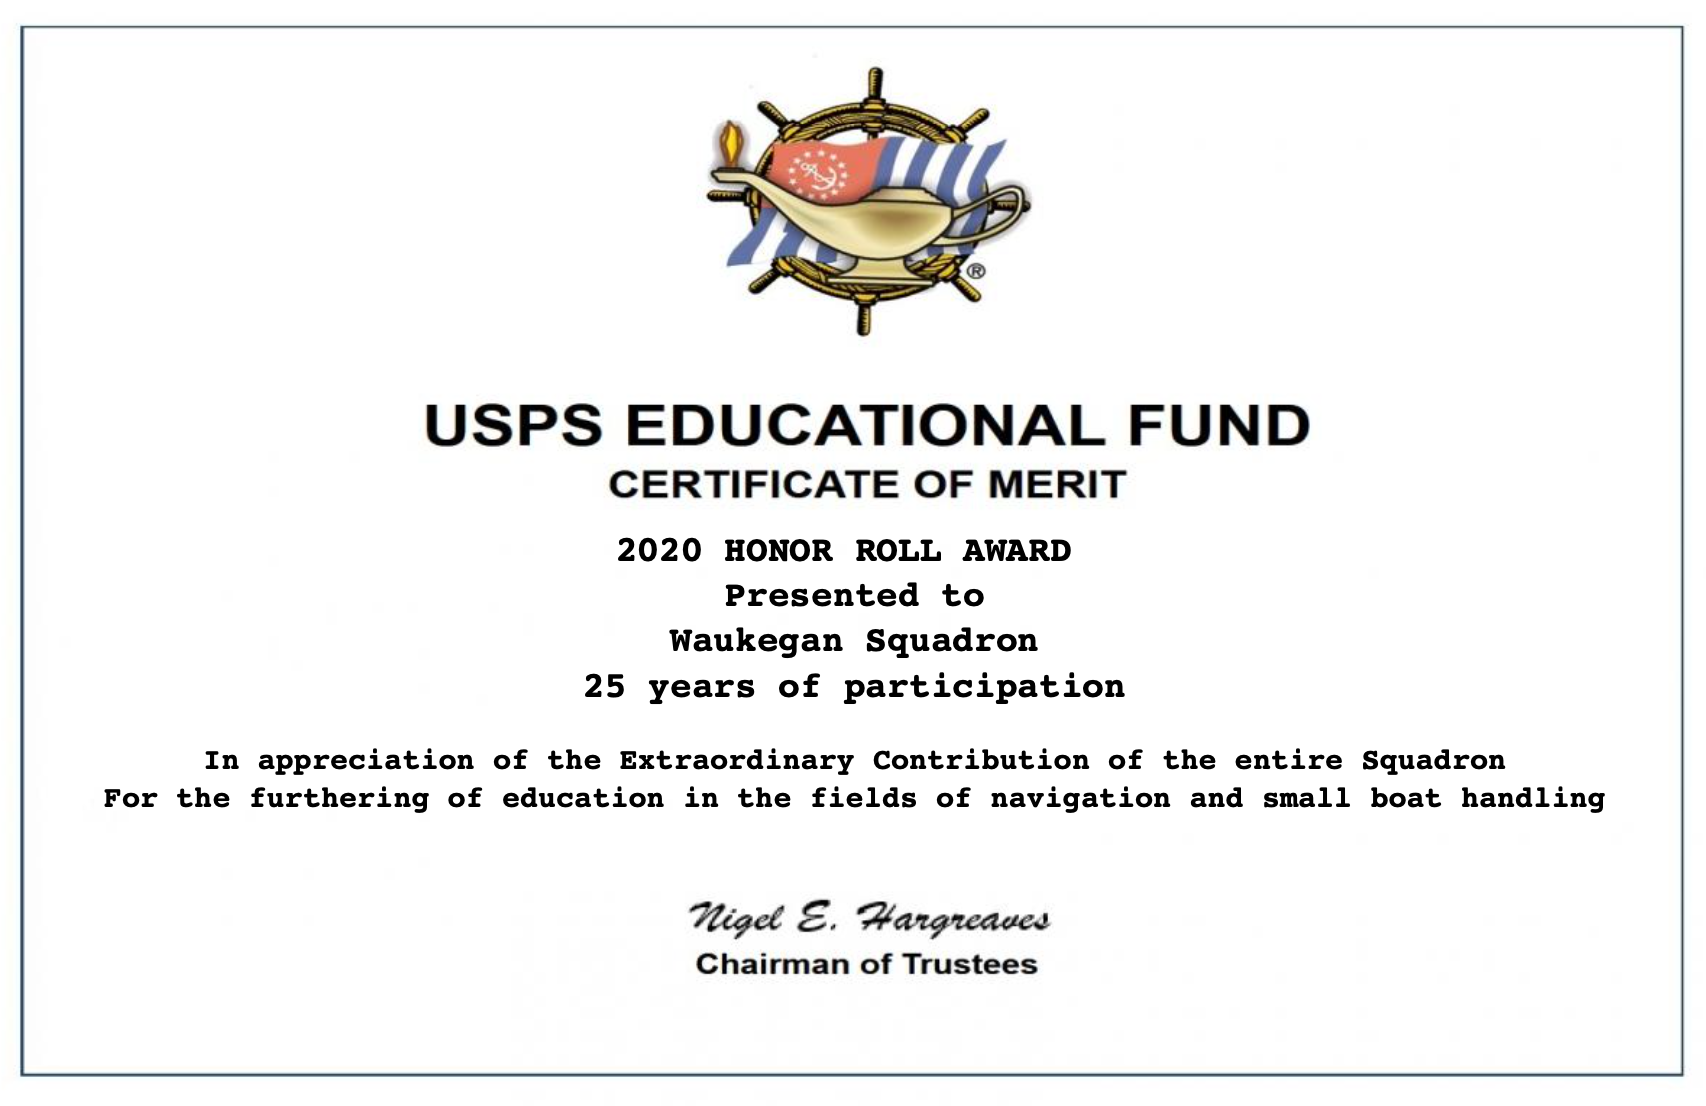 Pictured is the USPS Educational Fund Certificate of Merit 2020